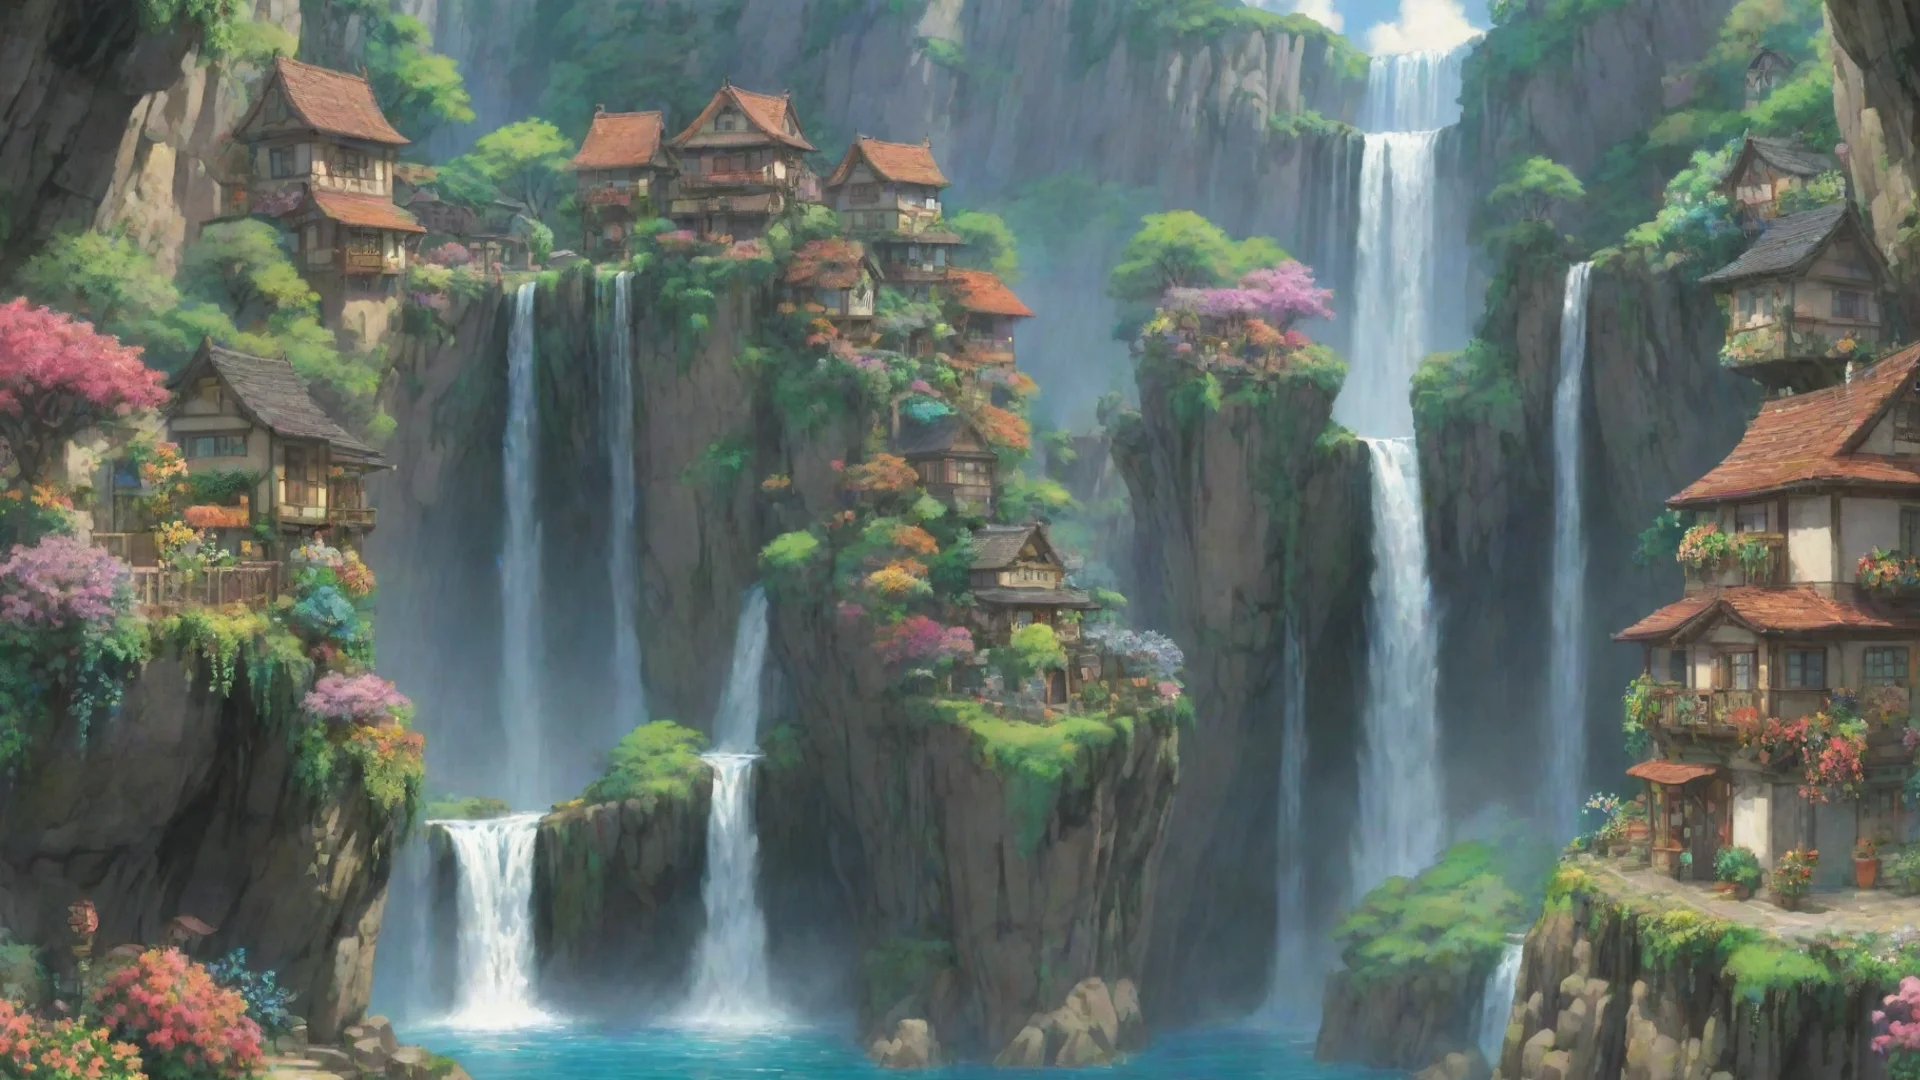 aiamazing studio ghibli best award winning art environment sheer overhang cliff water fall city cute town with flowers hanging plants awesome portrait 2 wide